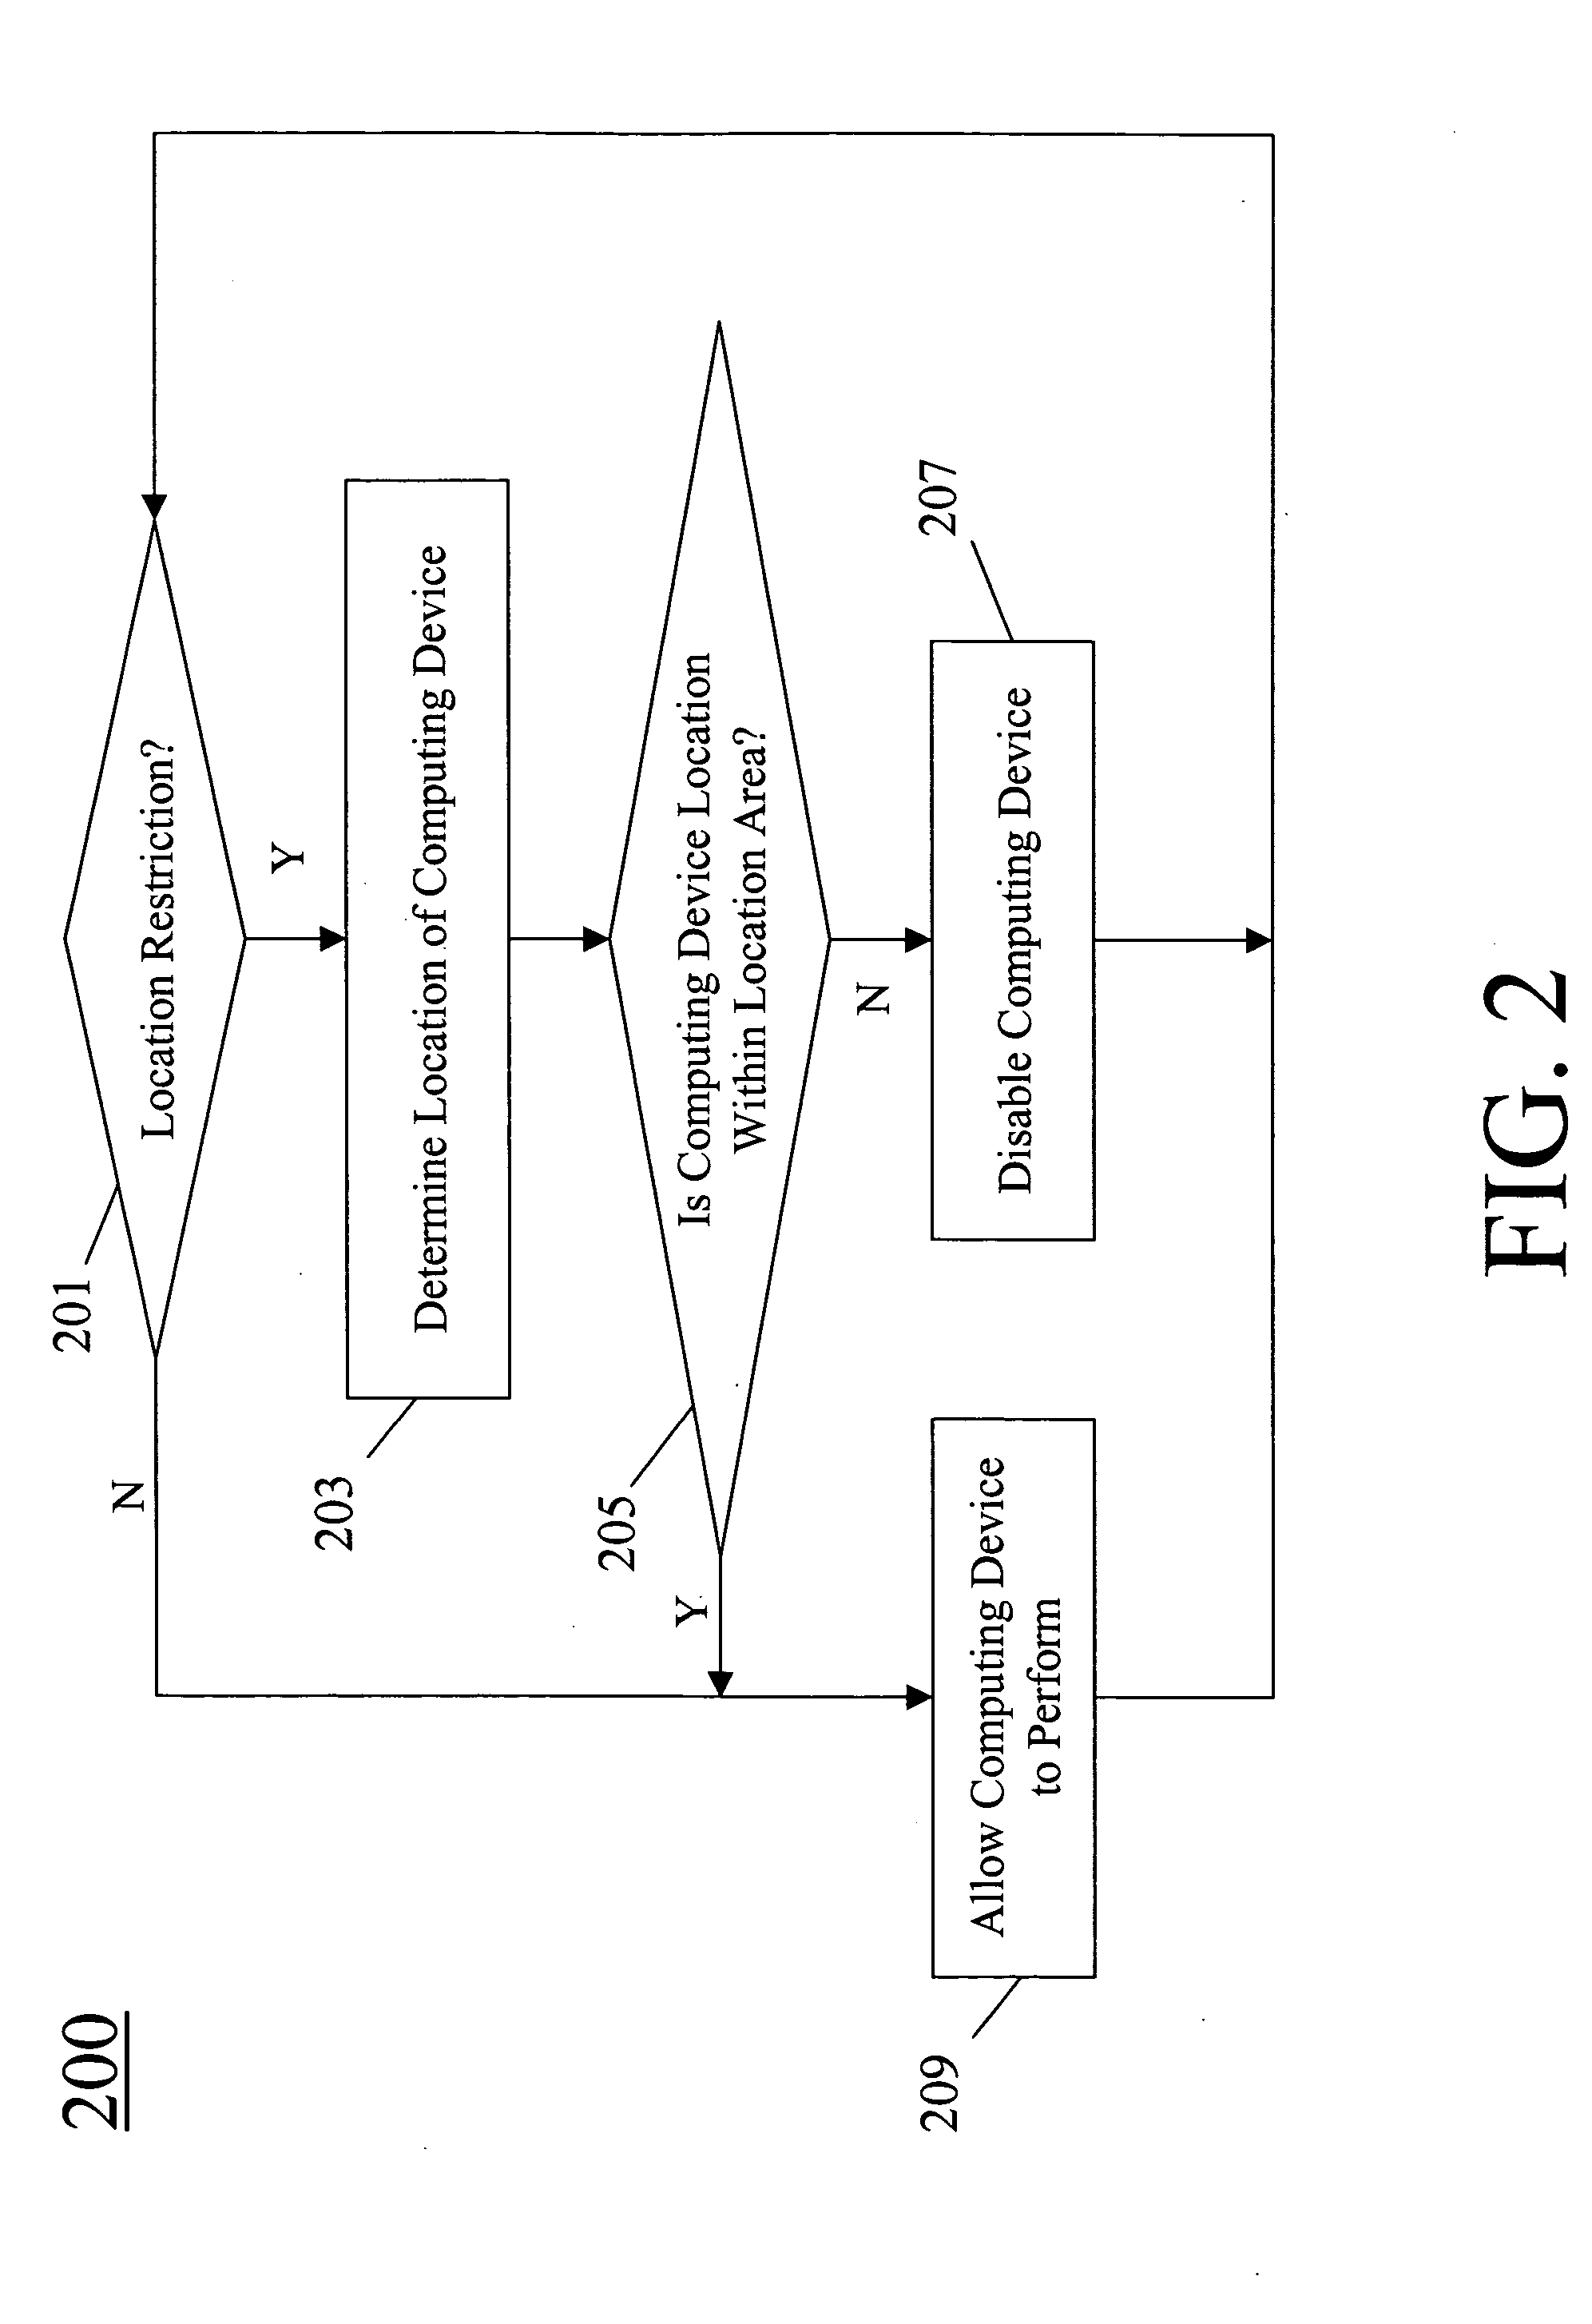 Method for disabling a computing device based on the location of the computing device